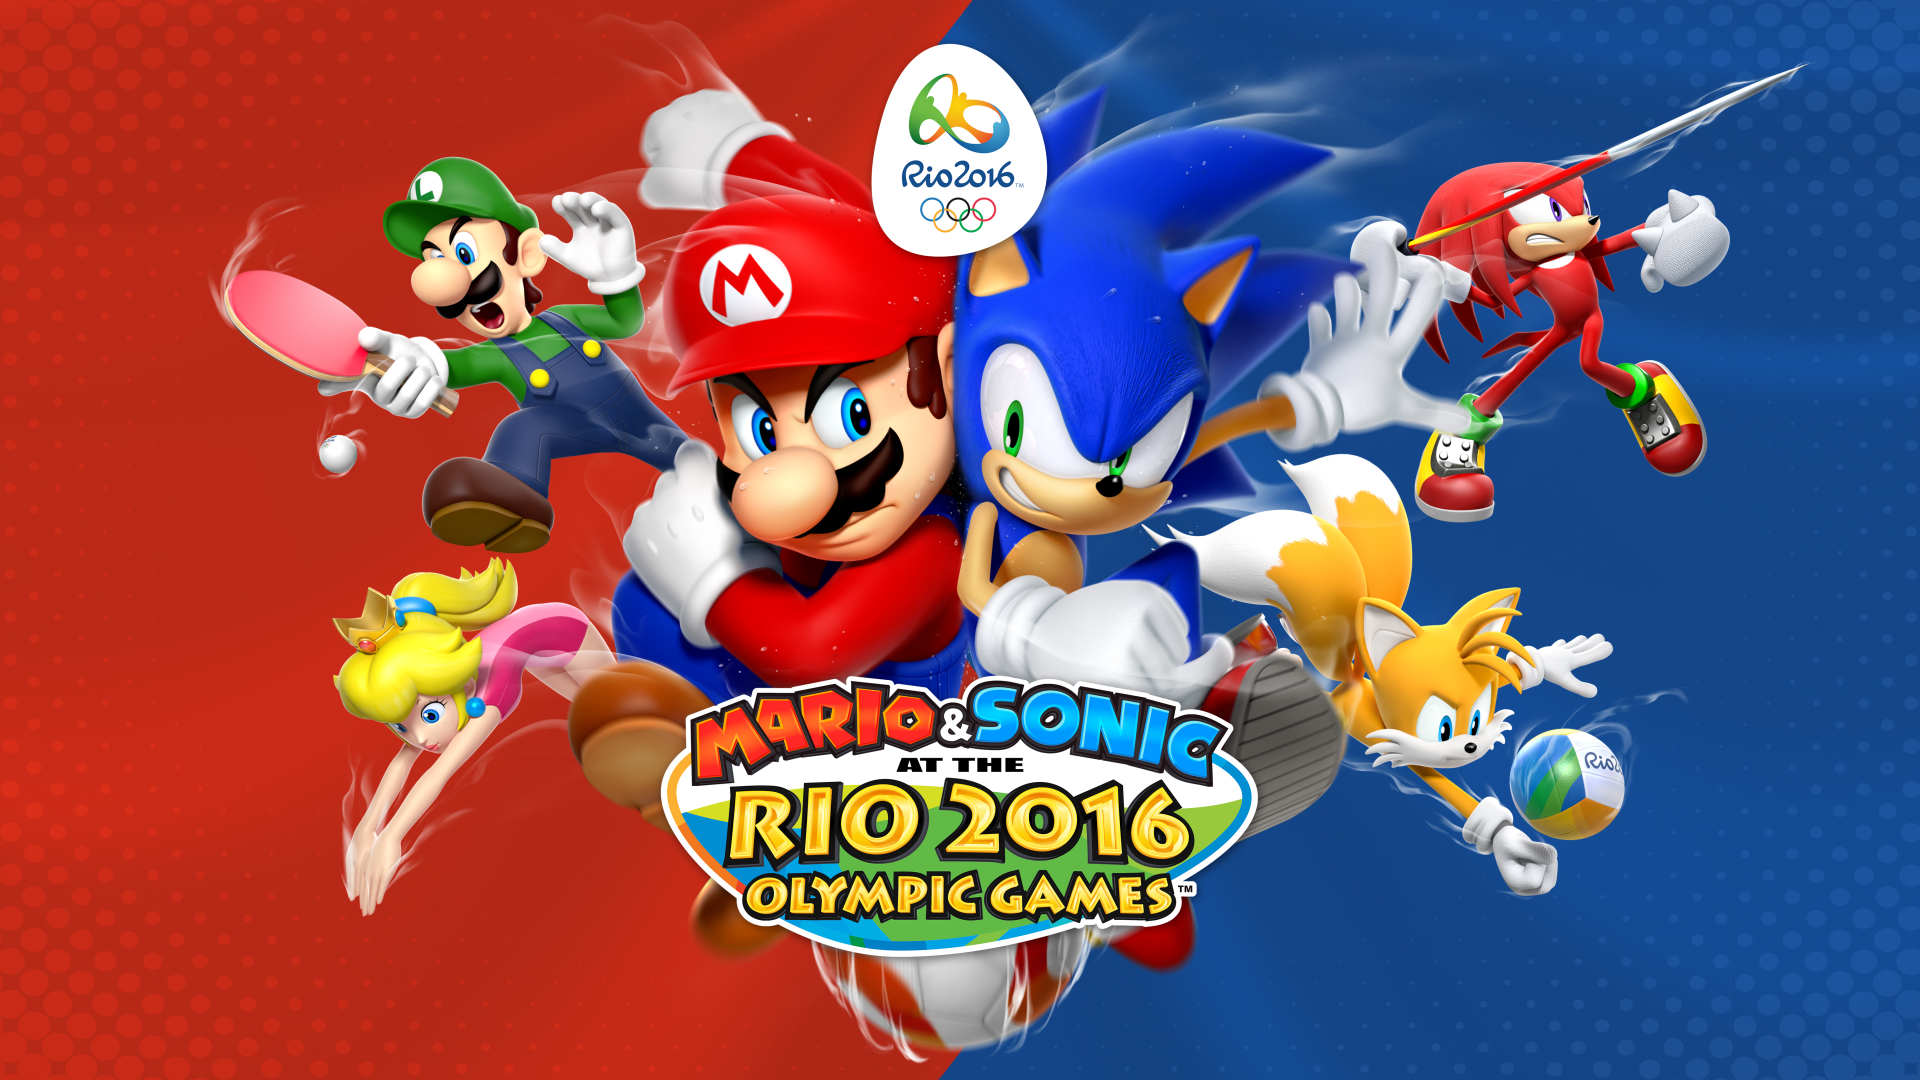 Mario & Sonic at the Rio 2016 Olympic Games (Wii U) Logo